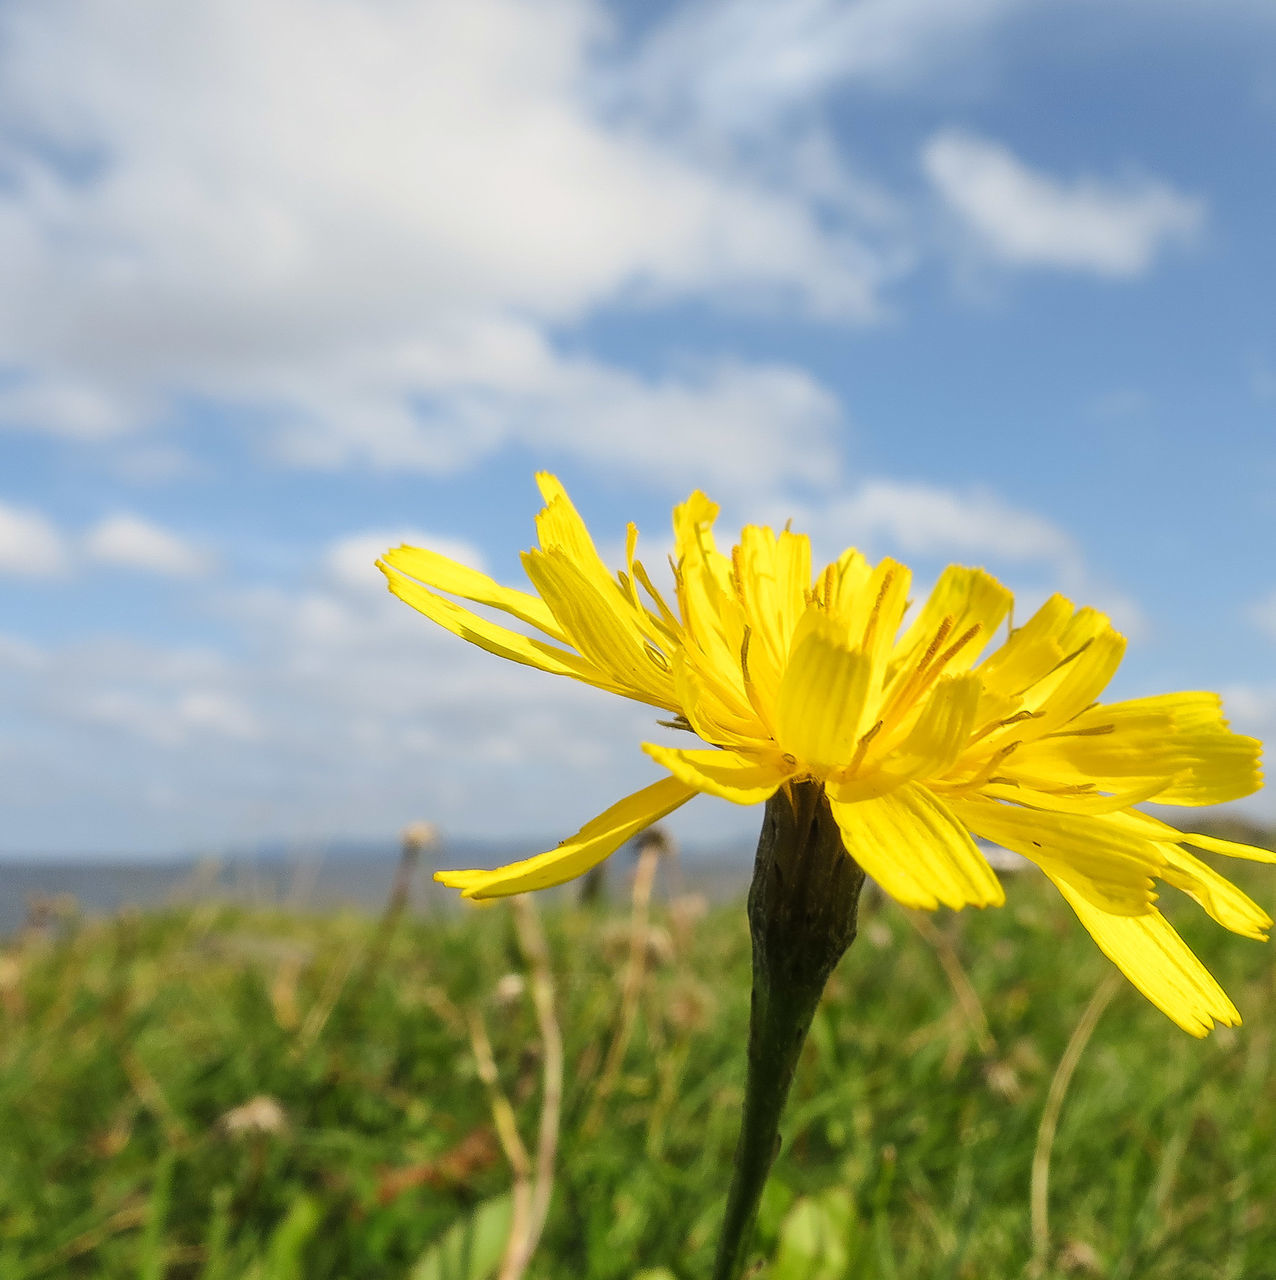 flower, yellow, sky, freshness, fragility, petal, growth, beauty in nature, field, flower head, cloud - sky, nature, blooming, cloud, plant, focus on foreground, stem, cloudy, close-up, tranquility